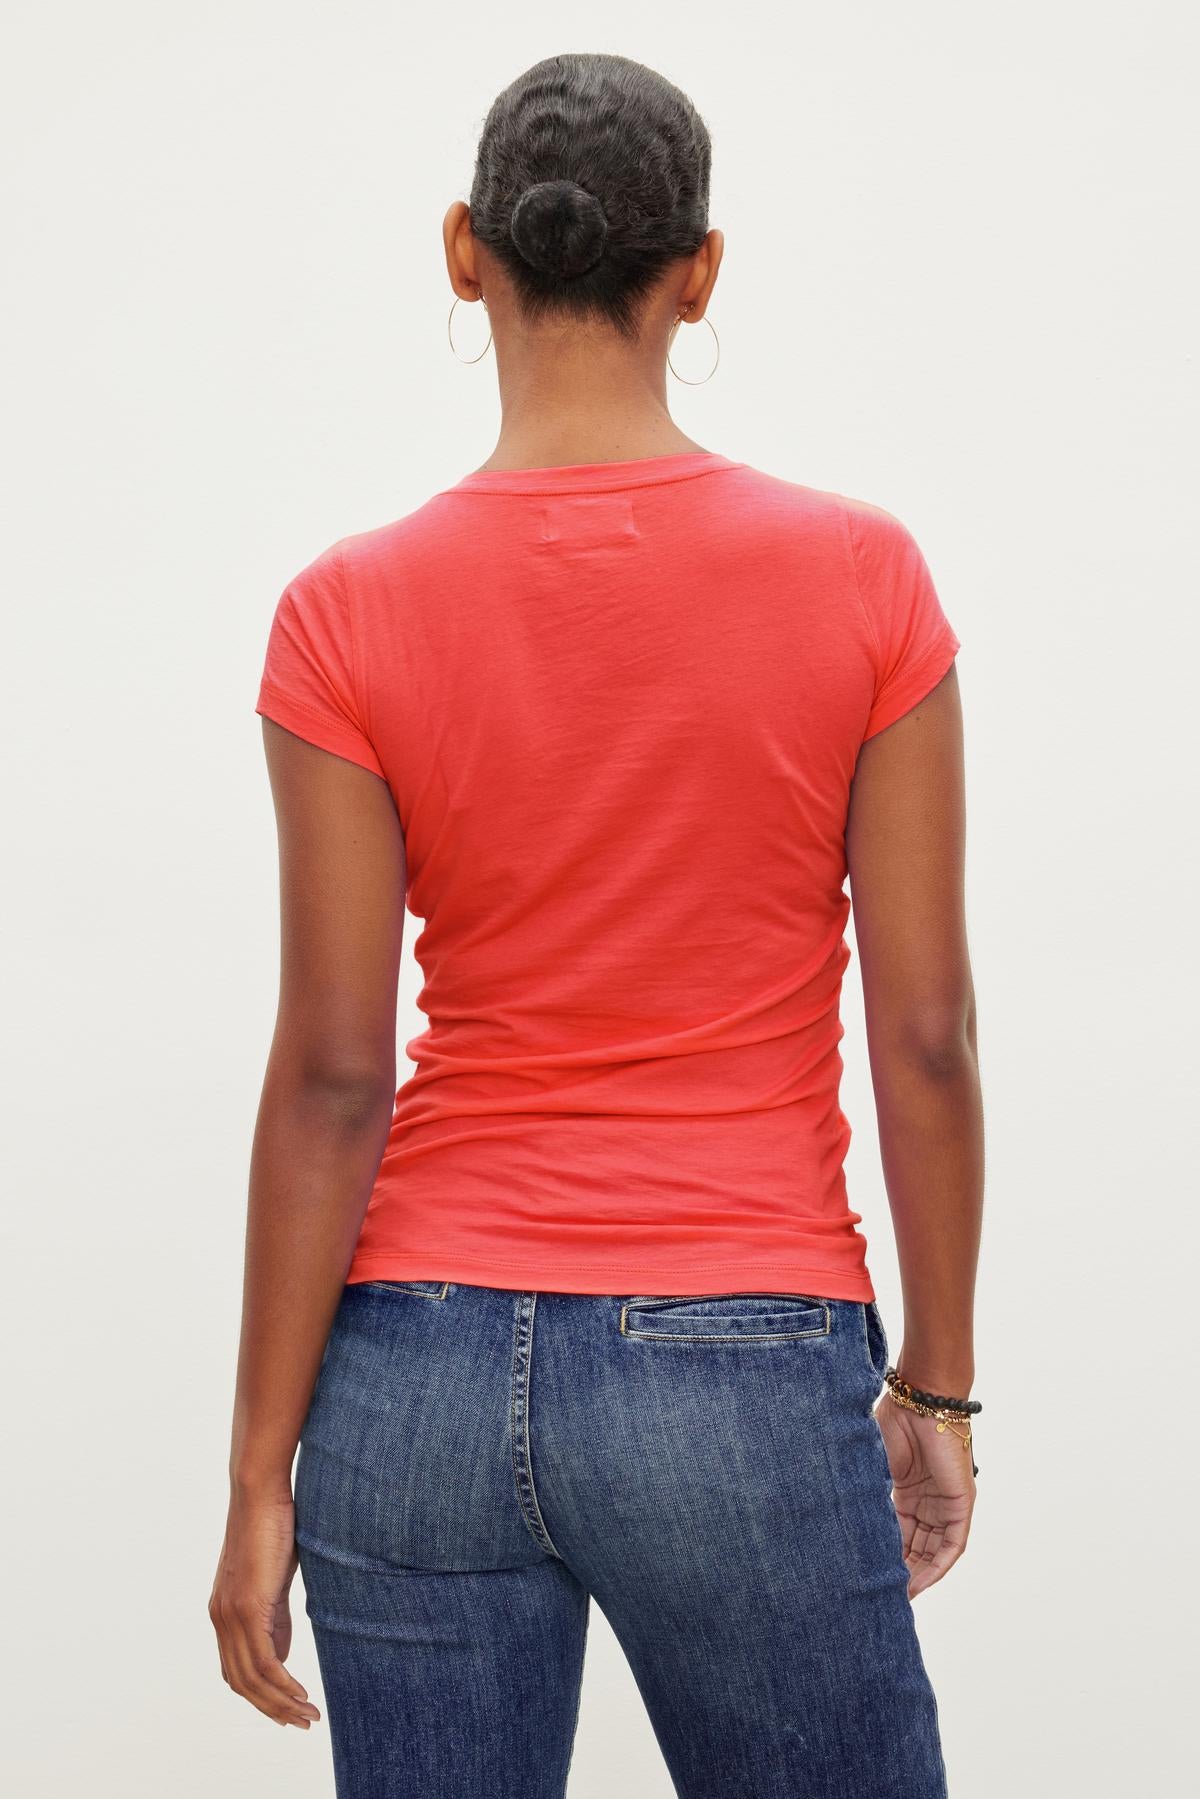 The back view of a woman wearing a red t-shirt and jeans, jazzing up her look with an Velvet by Graham & Spencer JEMMA GAUZY WHISPER FITTED CREW NECK TEE.-36002770518209